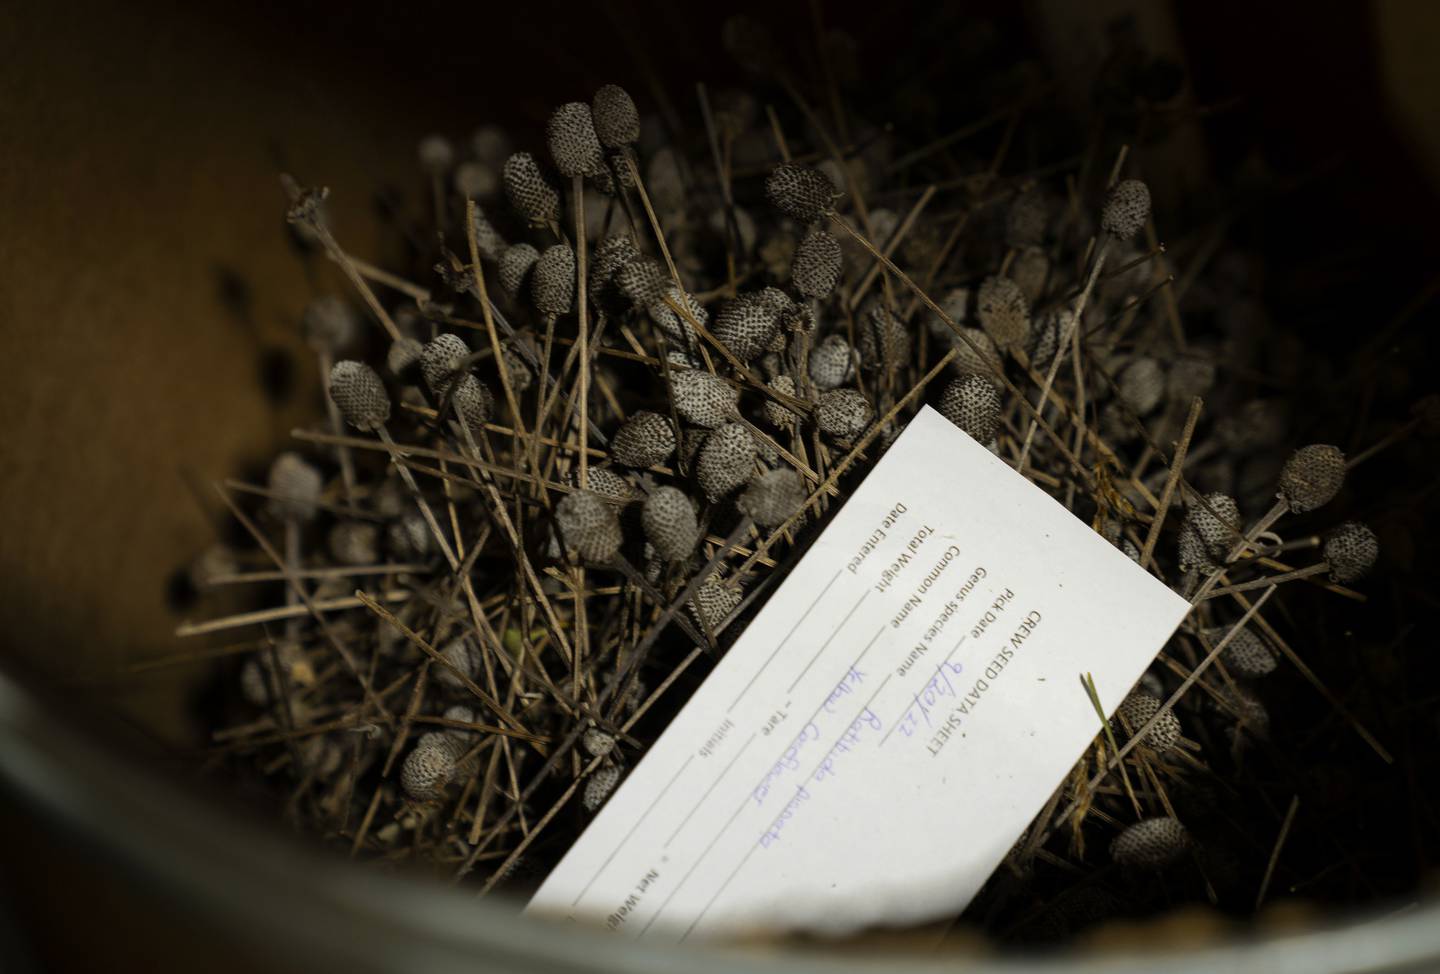 Seed of native plants collected to be dried, milled and planted at Nachusa Grasslands.